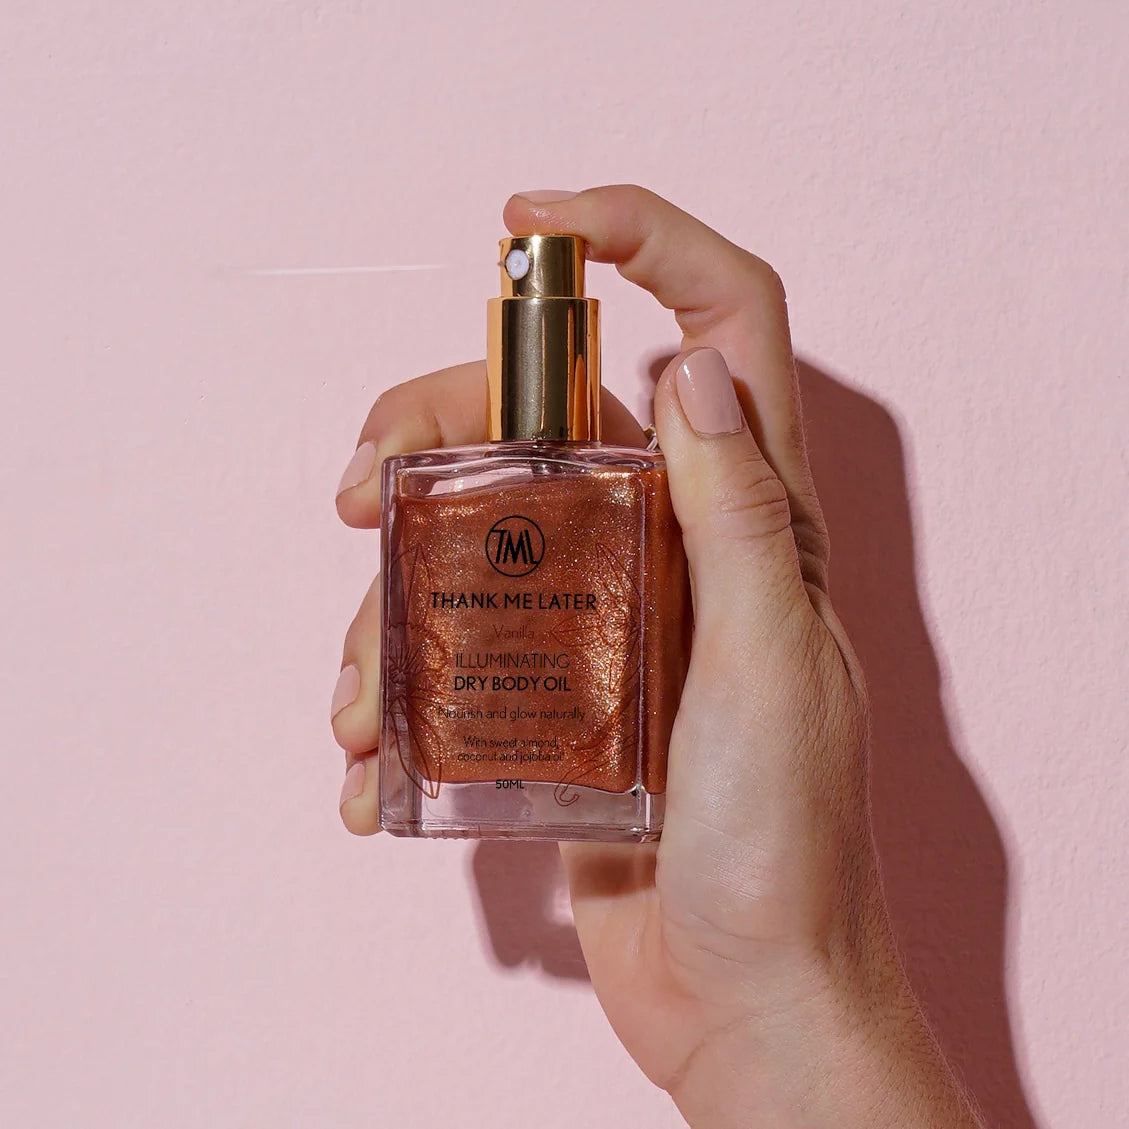 Thank Me Later - The Body Oil